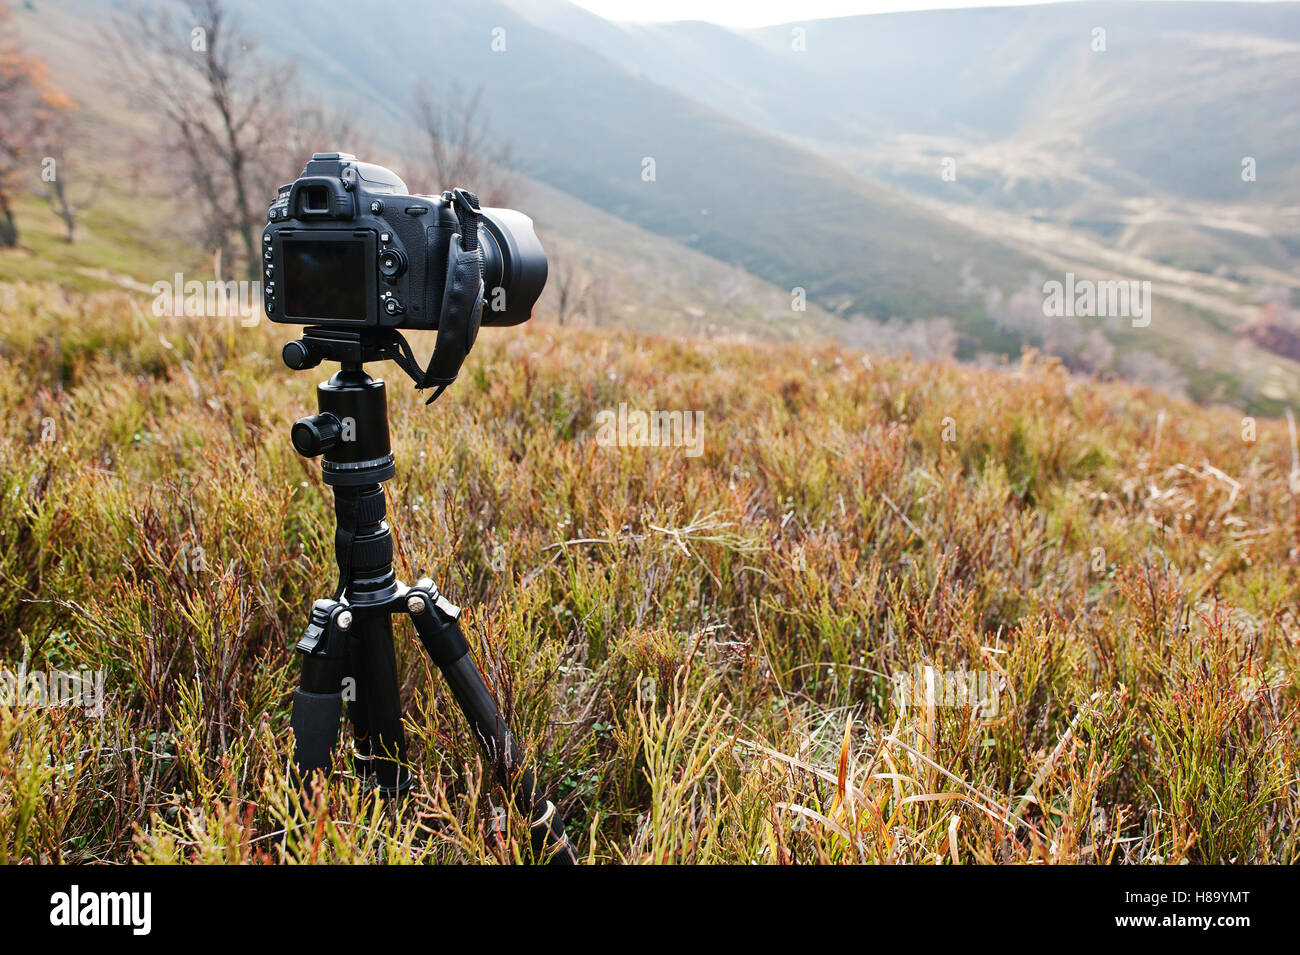 Modern professional dslr camera on a tripod, outdoor photography in wildlife. Mountains background. Stock Photo